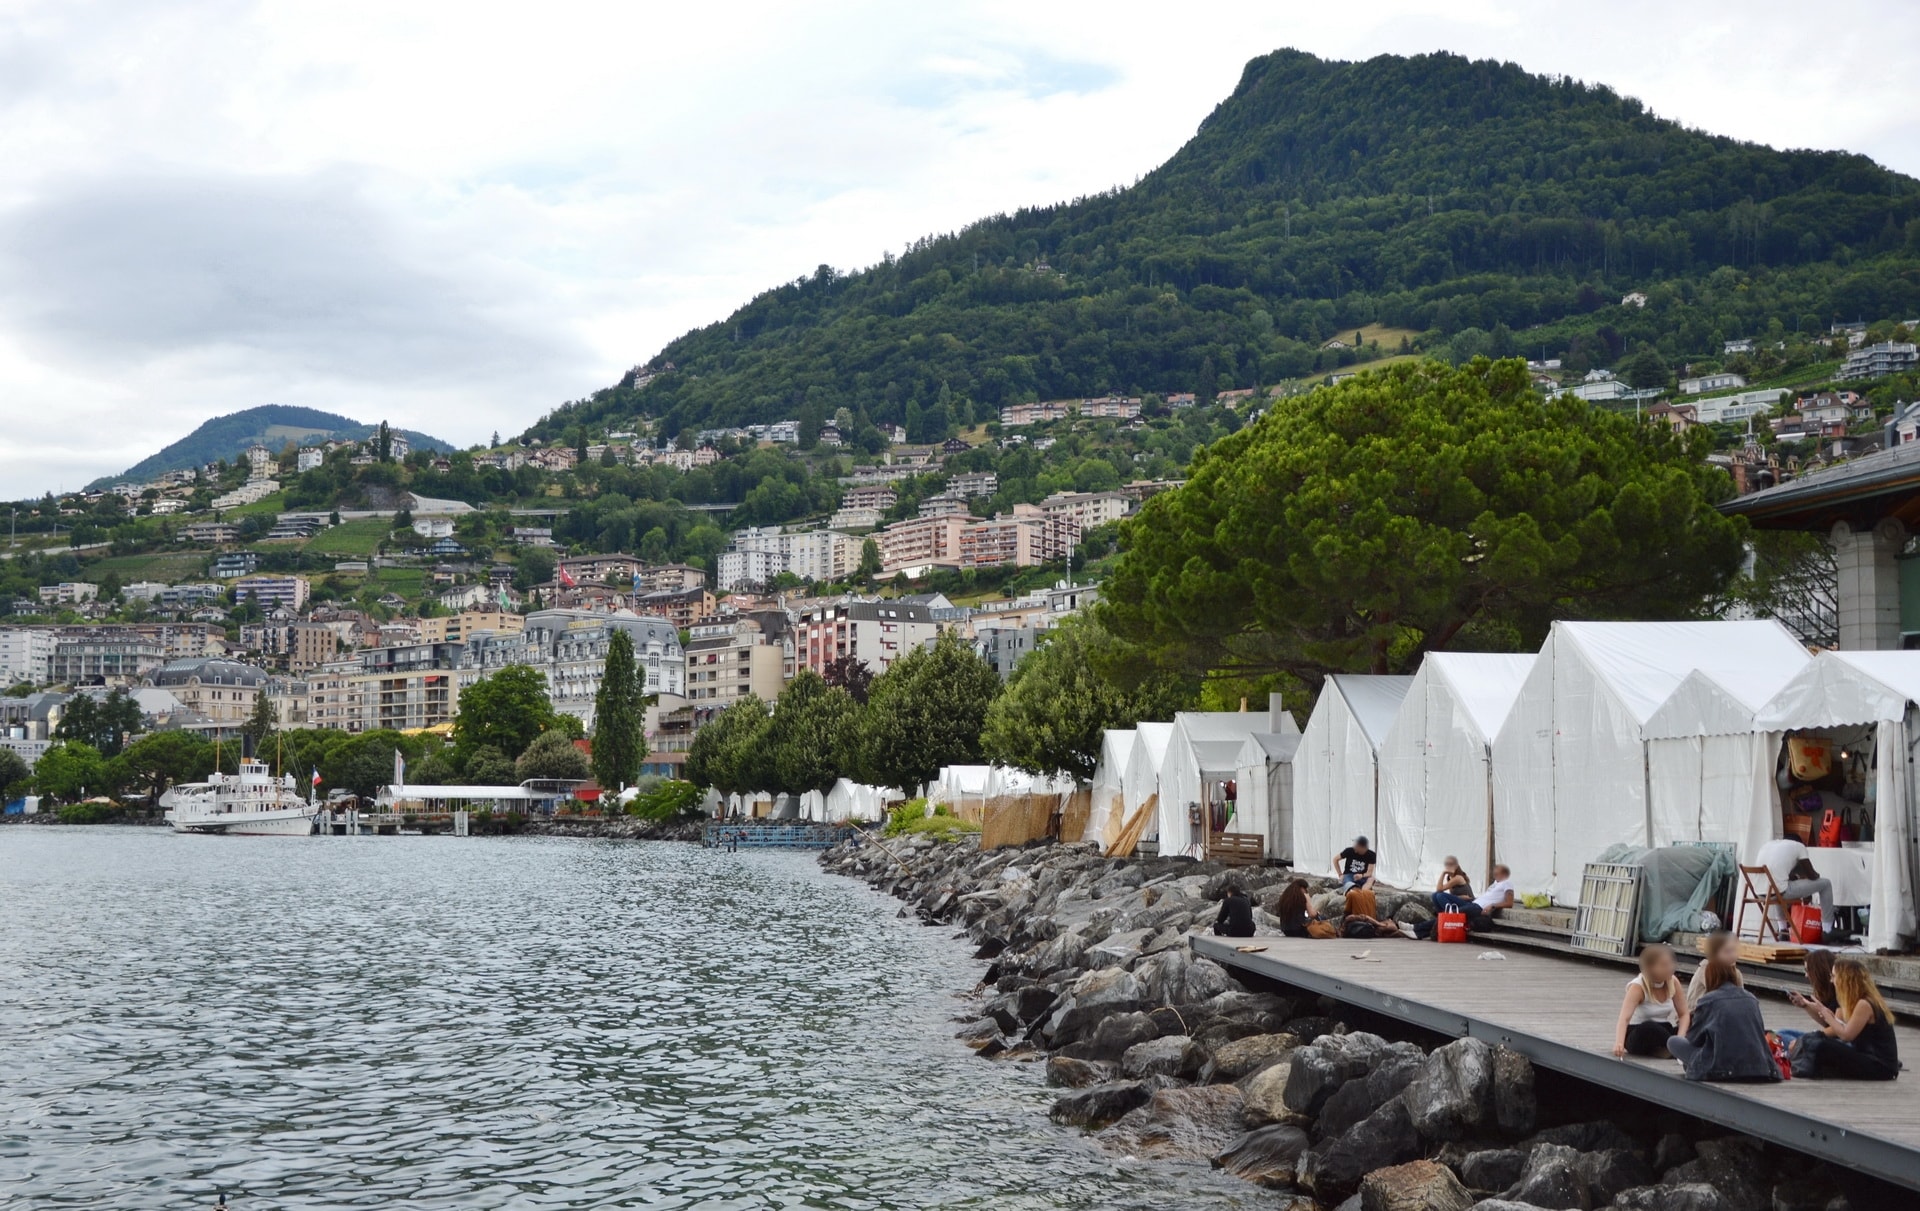 Montreux in preparation for the Jazz Festival